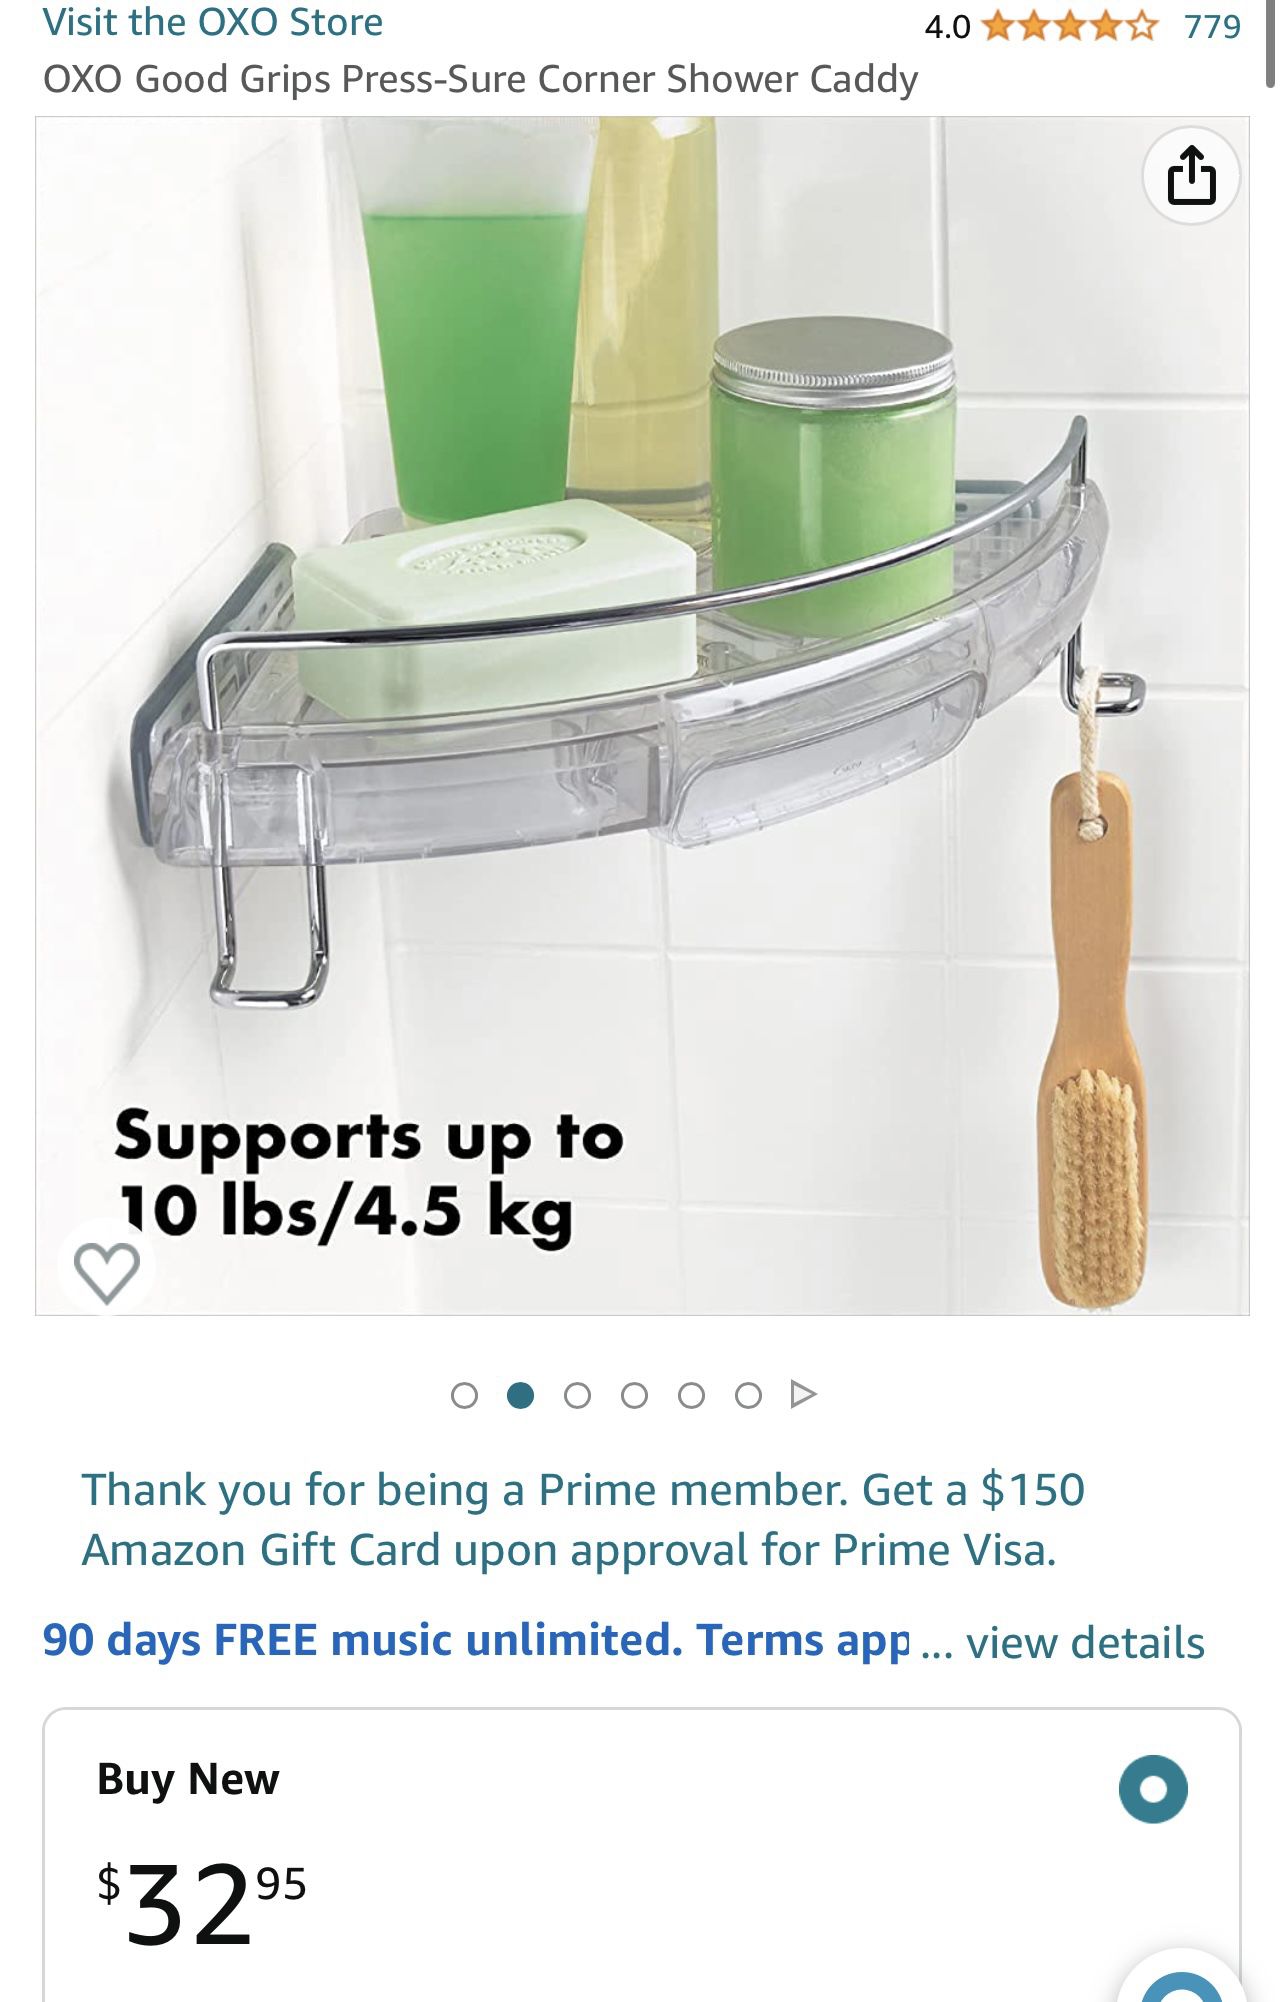 OXO Good Grips Press-Sure Corner Shower Caddy for Sale in Kalama